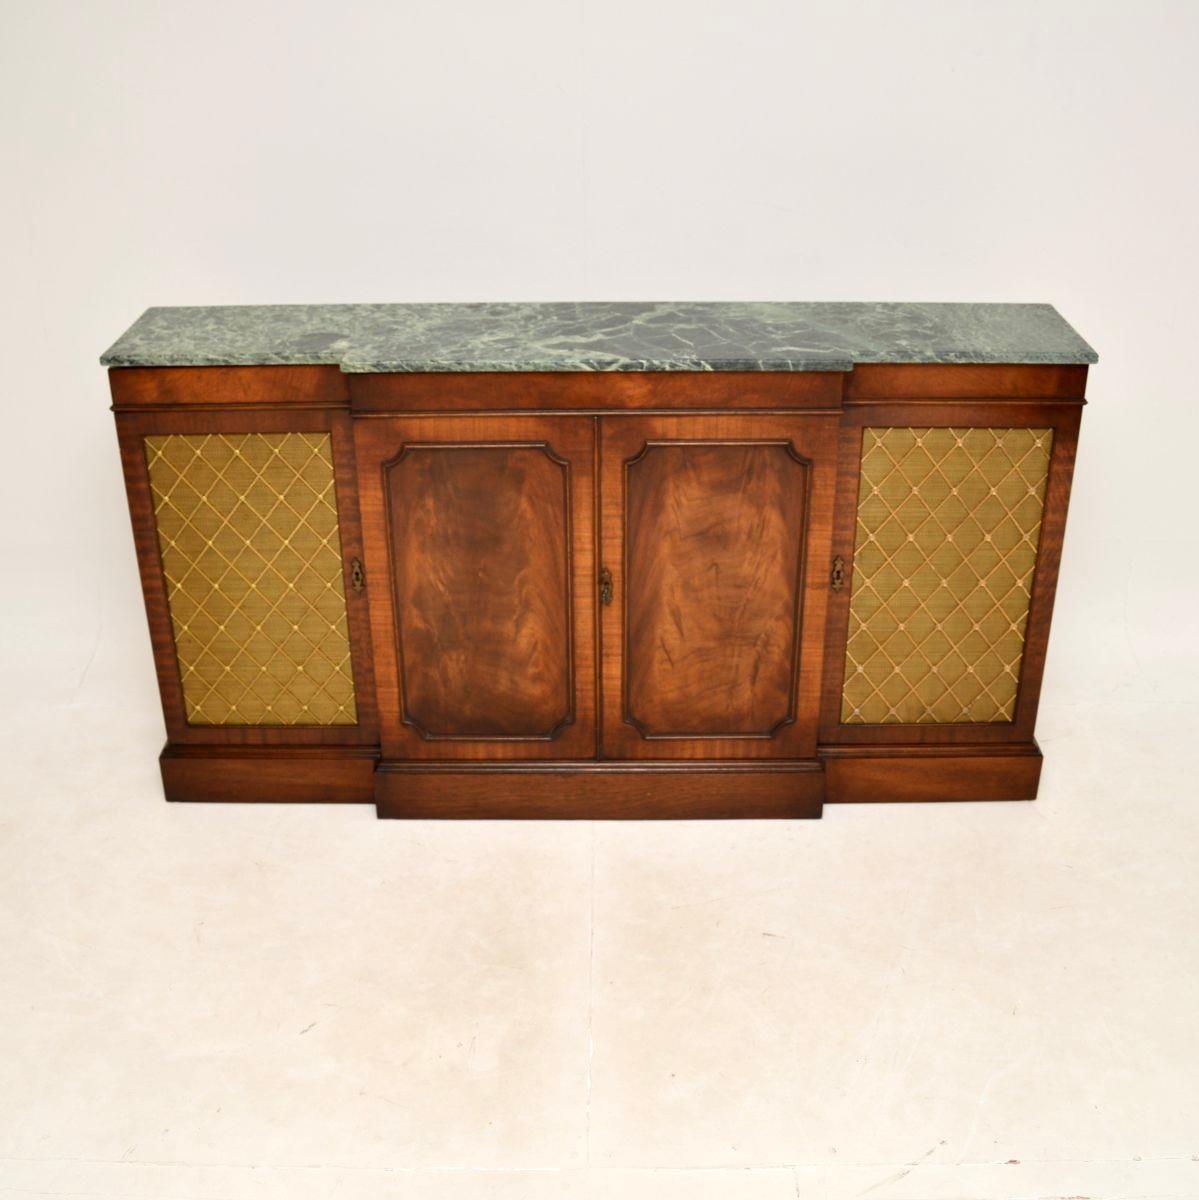 An impressive and very well made antique marble top grill front sideboard in the classic Georgian style. This was made in England, it dates from around the 1930’s.

The quality is outstanding, this is beautifully designed and is a very useful piece